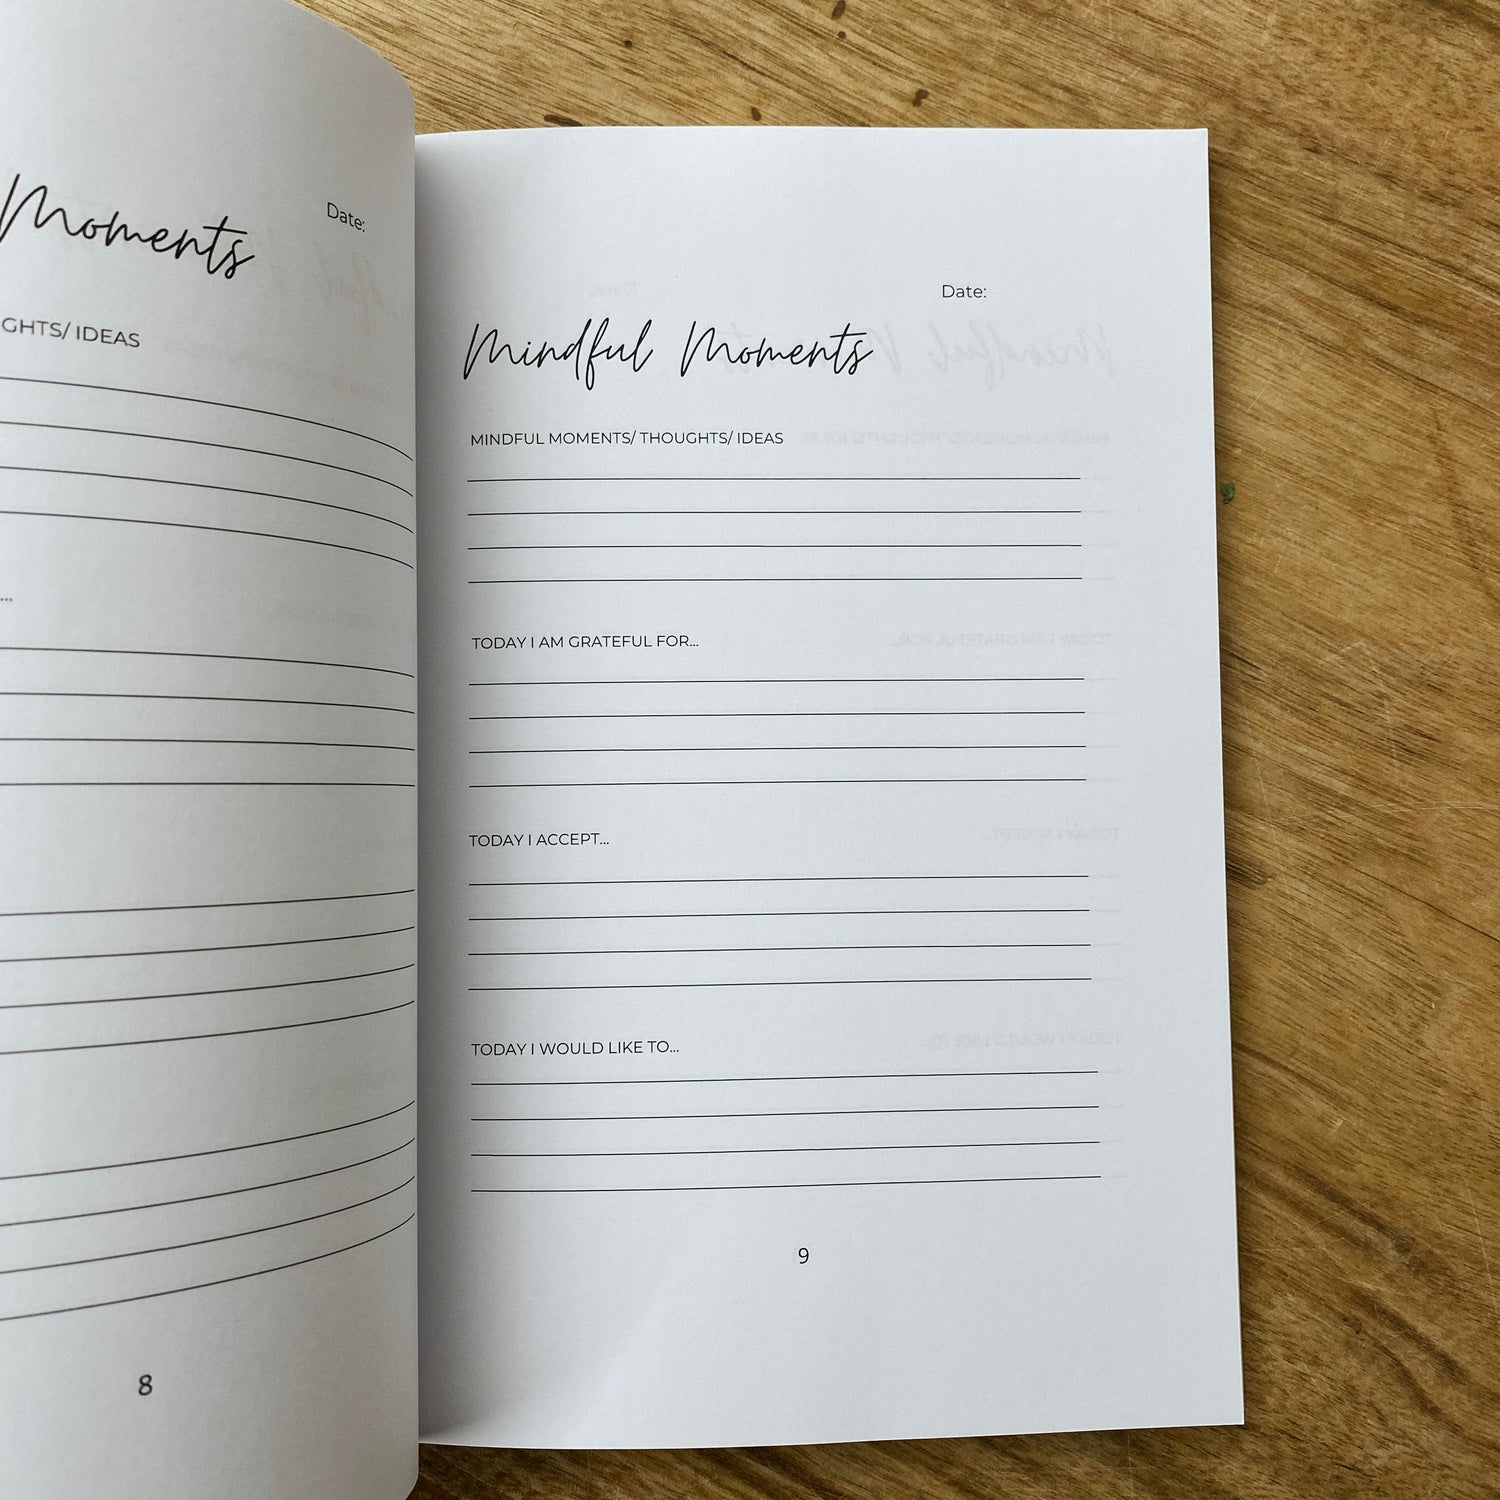 Are Ye Well: Mindful Moments Journal